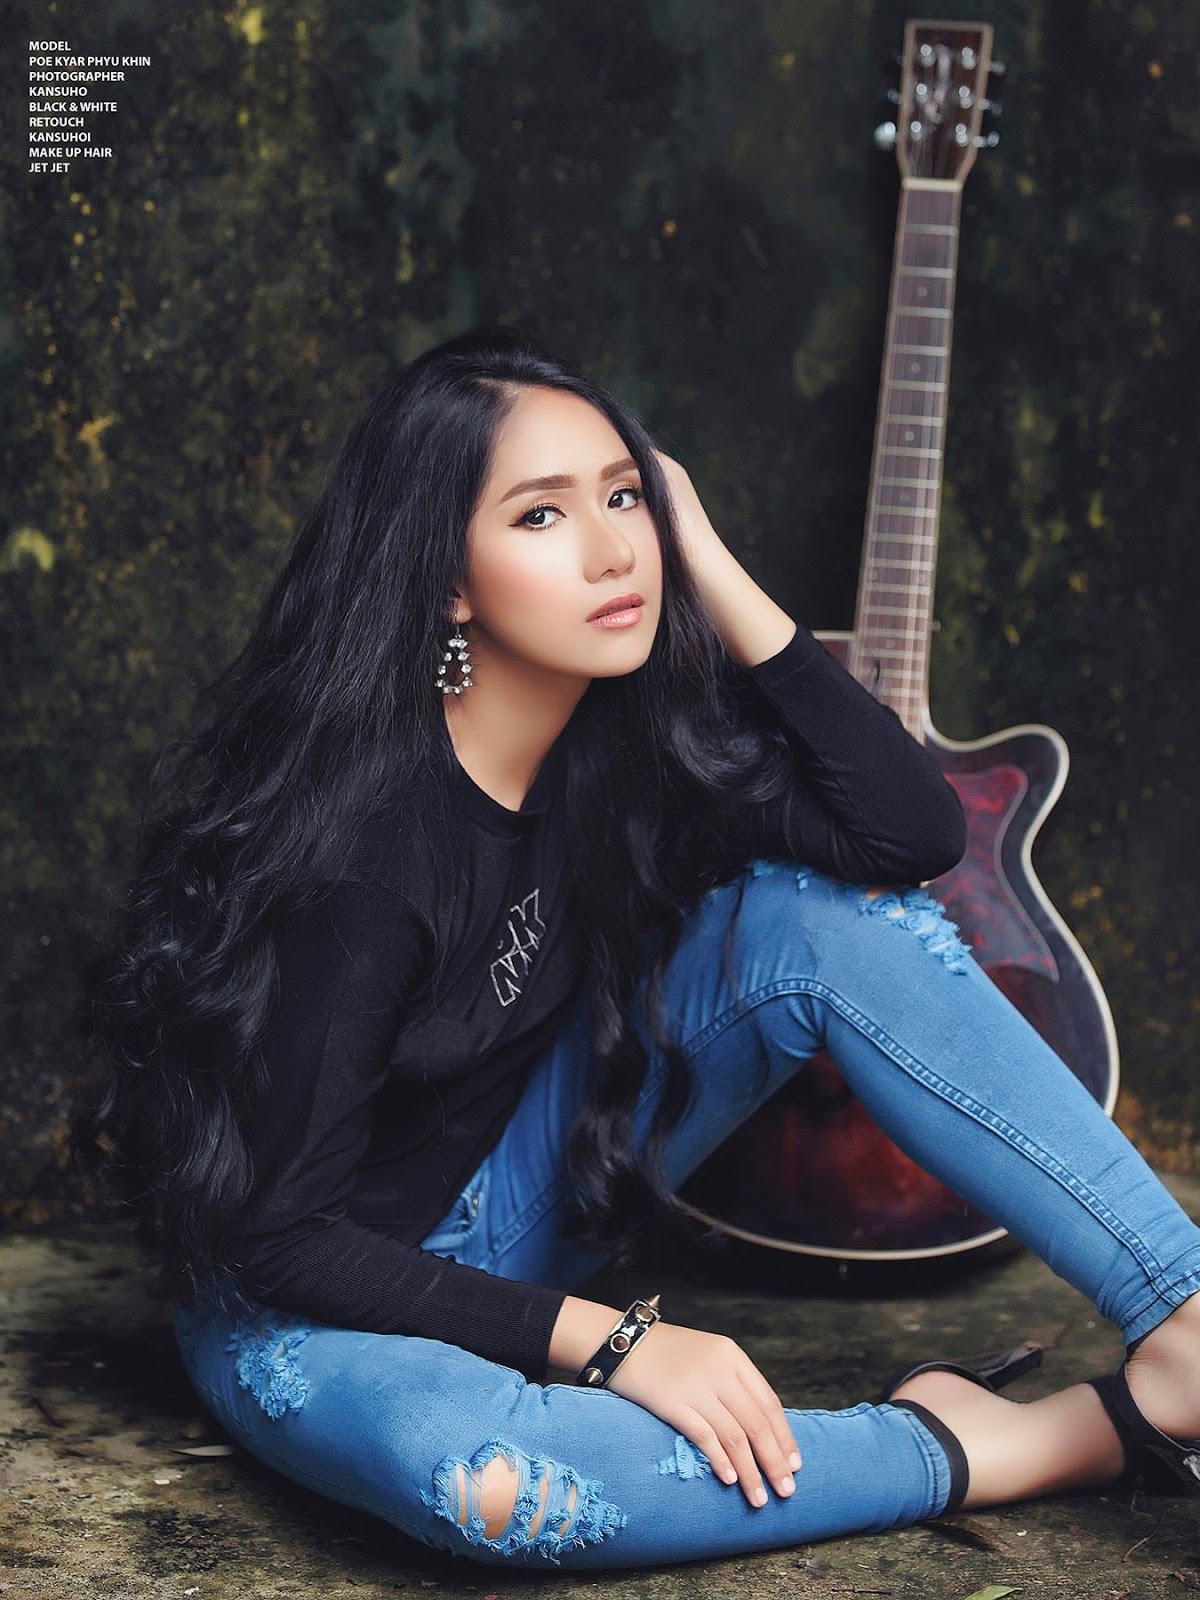 Poe Kyar Phyu Khin Fashion Photoshoot In Black Top and Blue Jeans